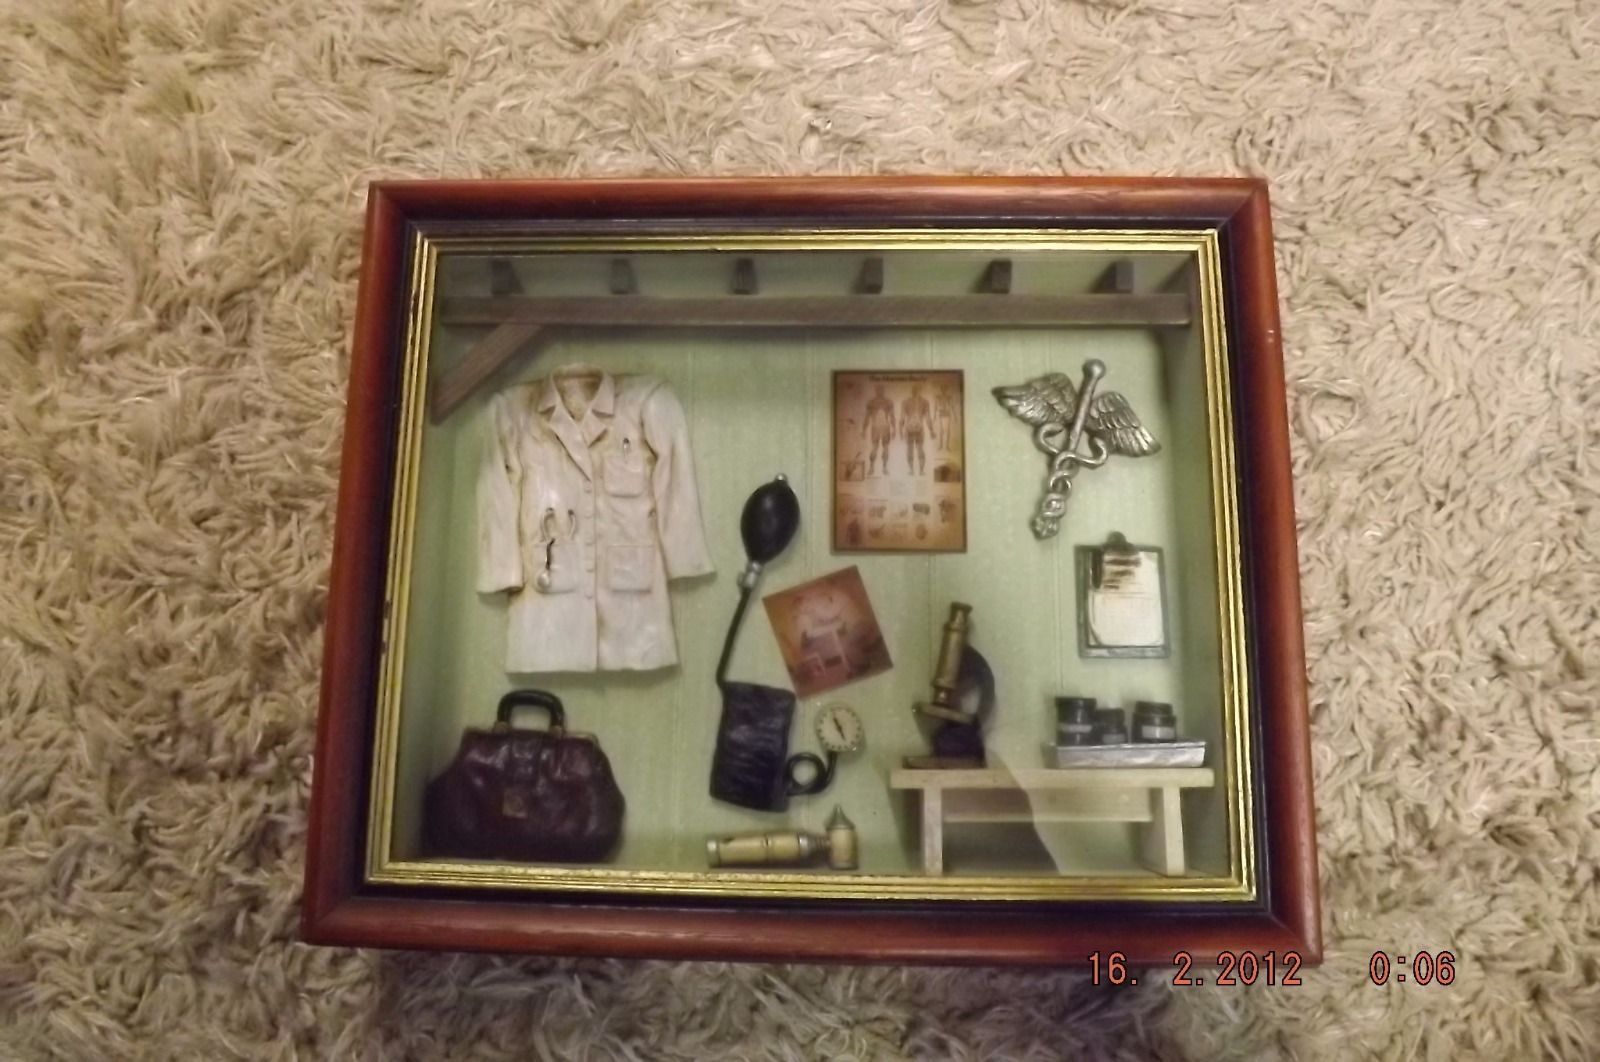 Doctor's Accessories Theme Shadow Box Wall Art Arister Gifts | Ebay For Shadow Box Wall Art (View 12 of 15)